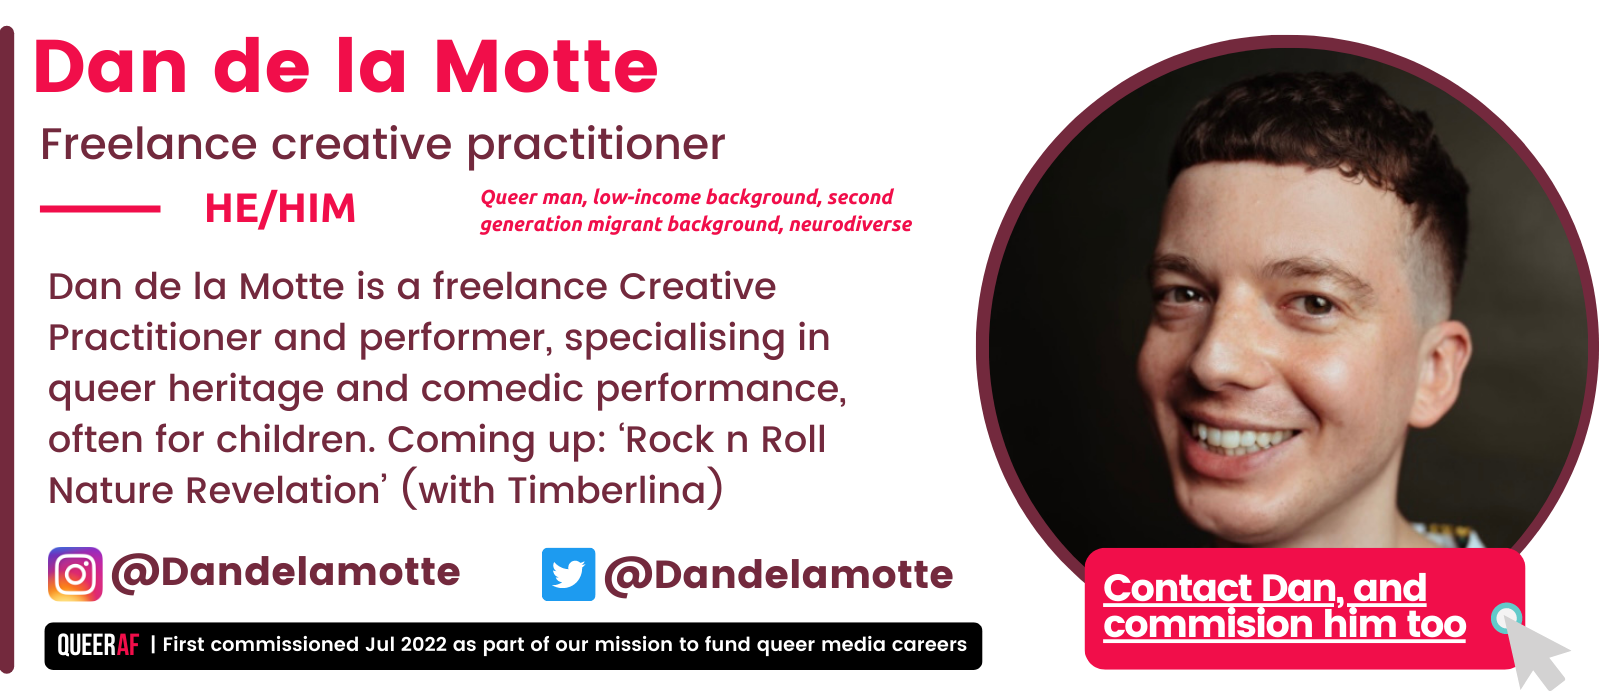 Contact Dan, and commision him too Dan de la Motte is a freelance Creative Practitioner and performer, specialising in queer heritage and comedic performance, often for children. Coming up: ‘Rock n Roll Nature Revelation’ (with Timberlina)